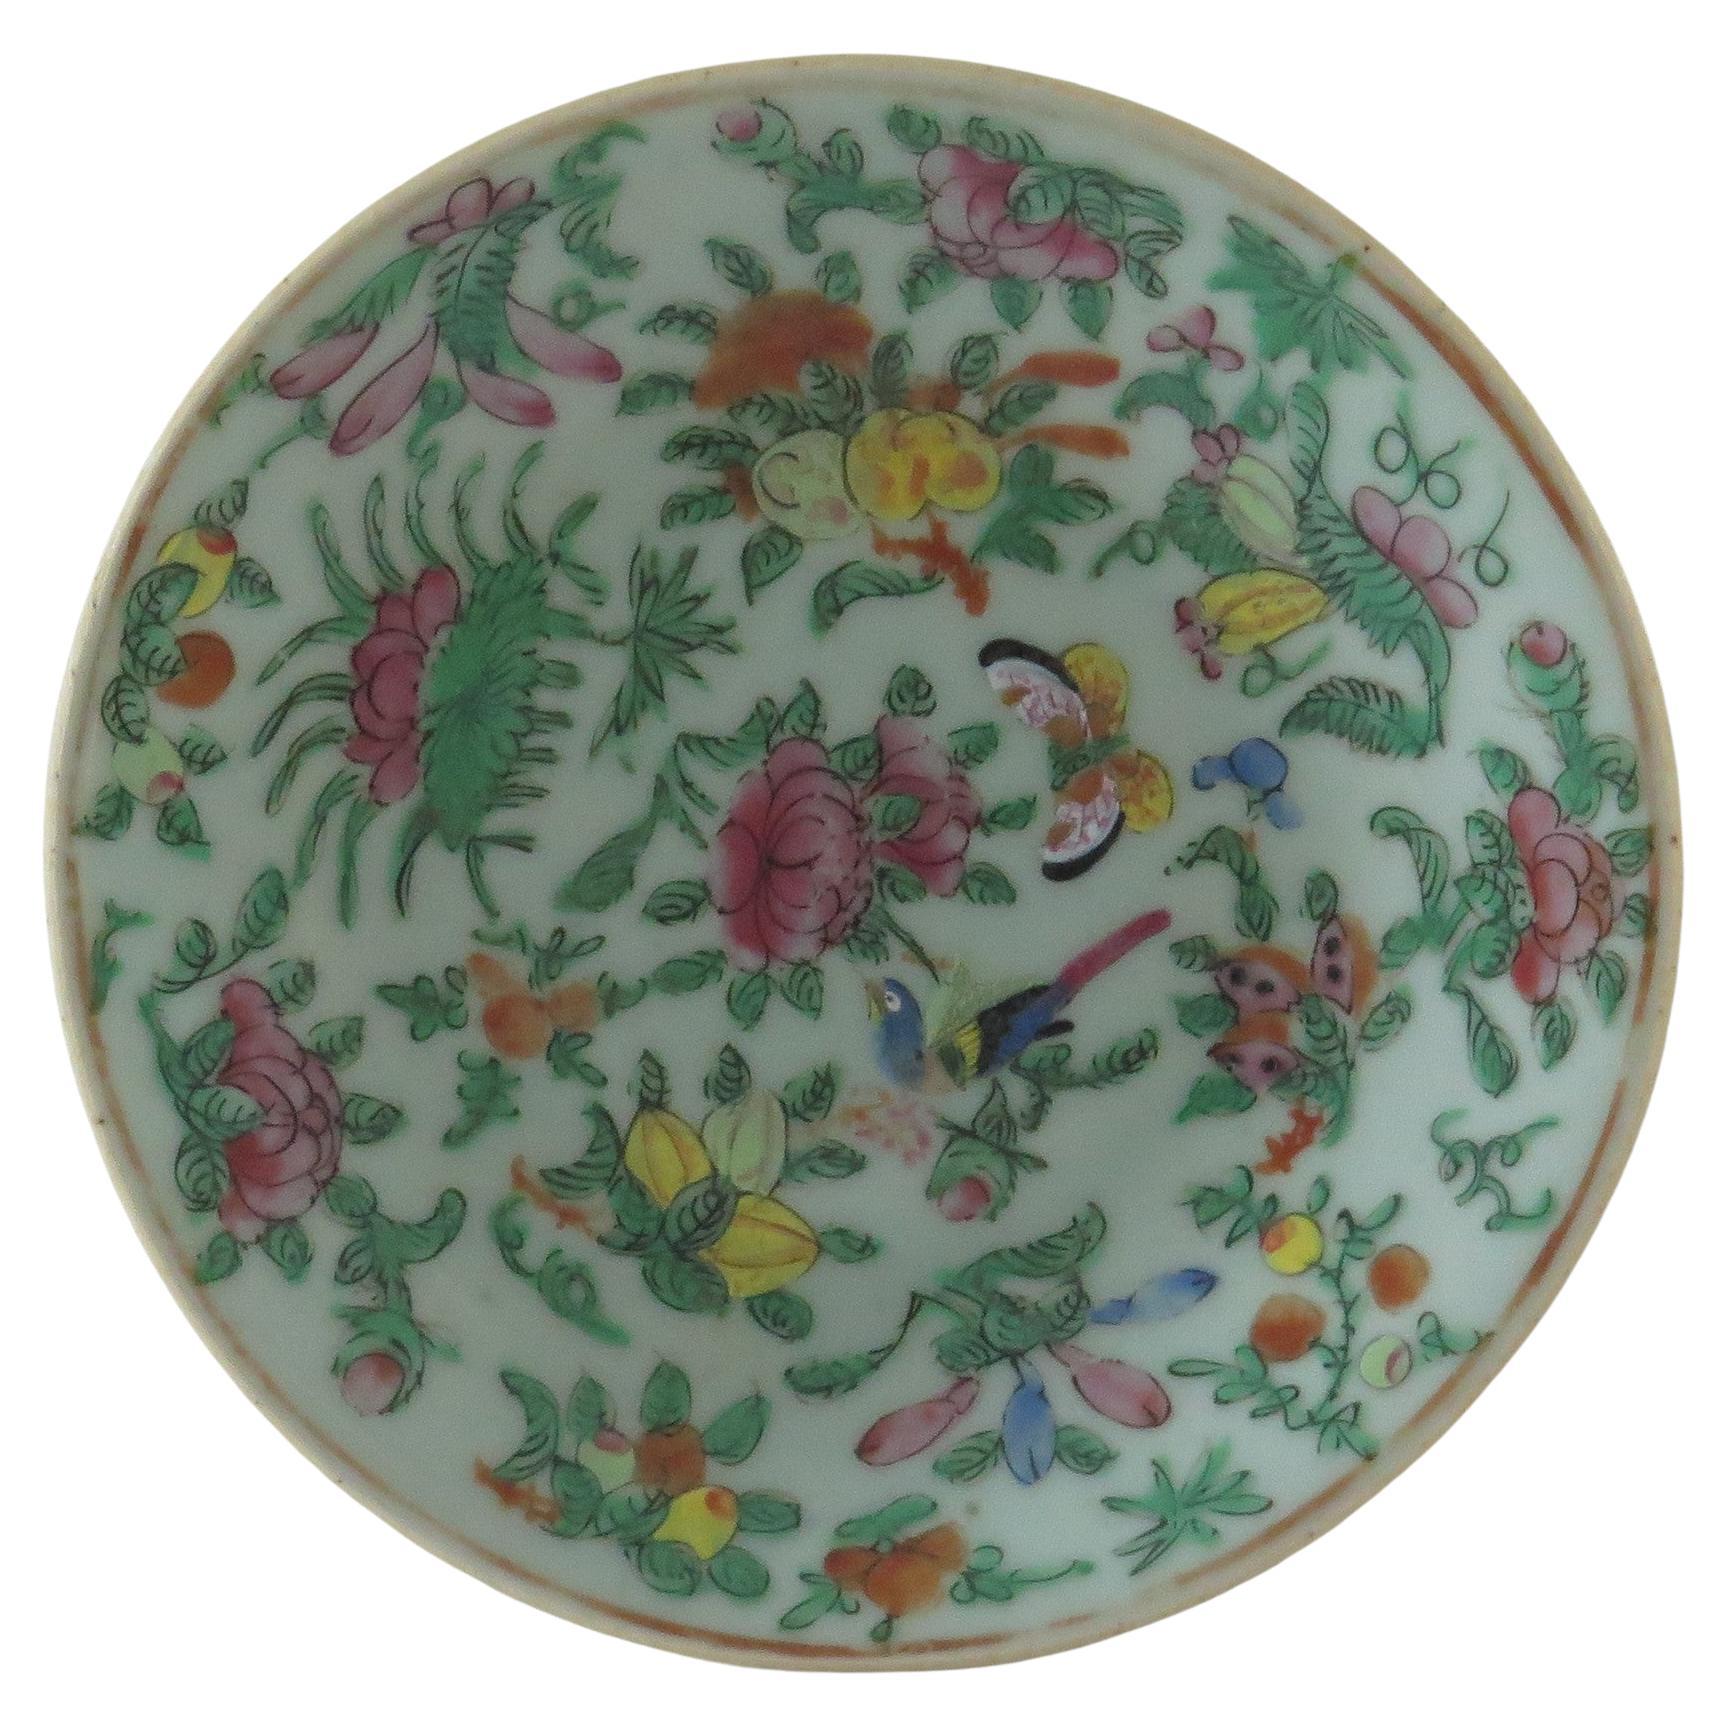 Chinese Export Porcelain Plate or Dish Celadon Glaze Hand Painted, Qing Ca 1820